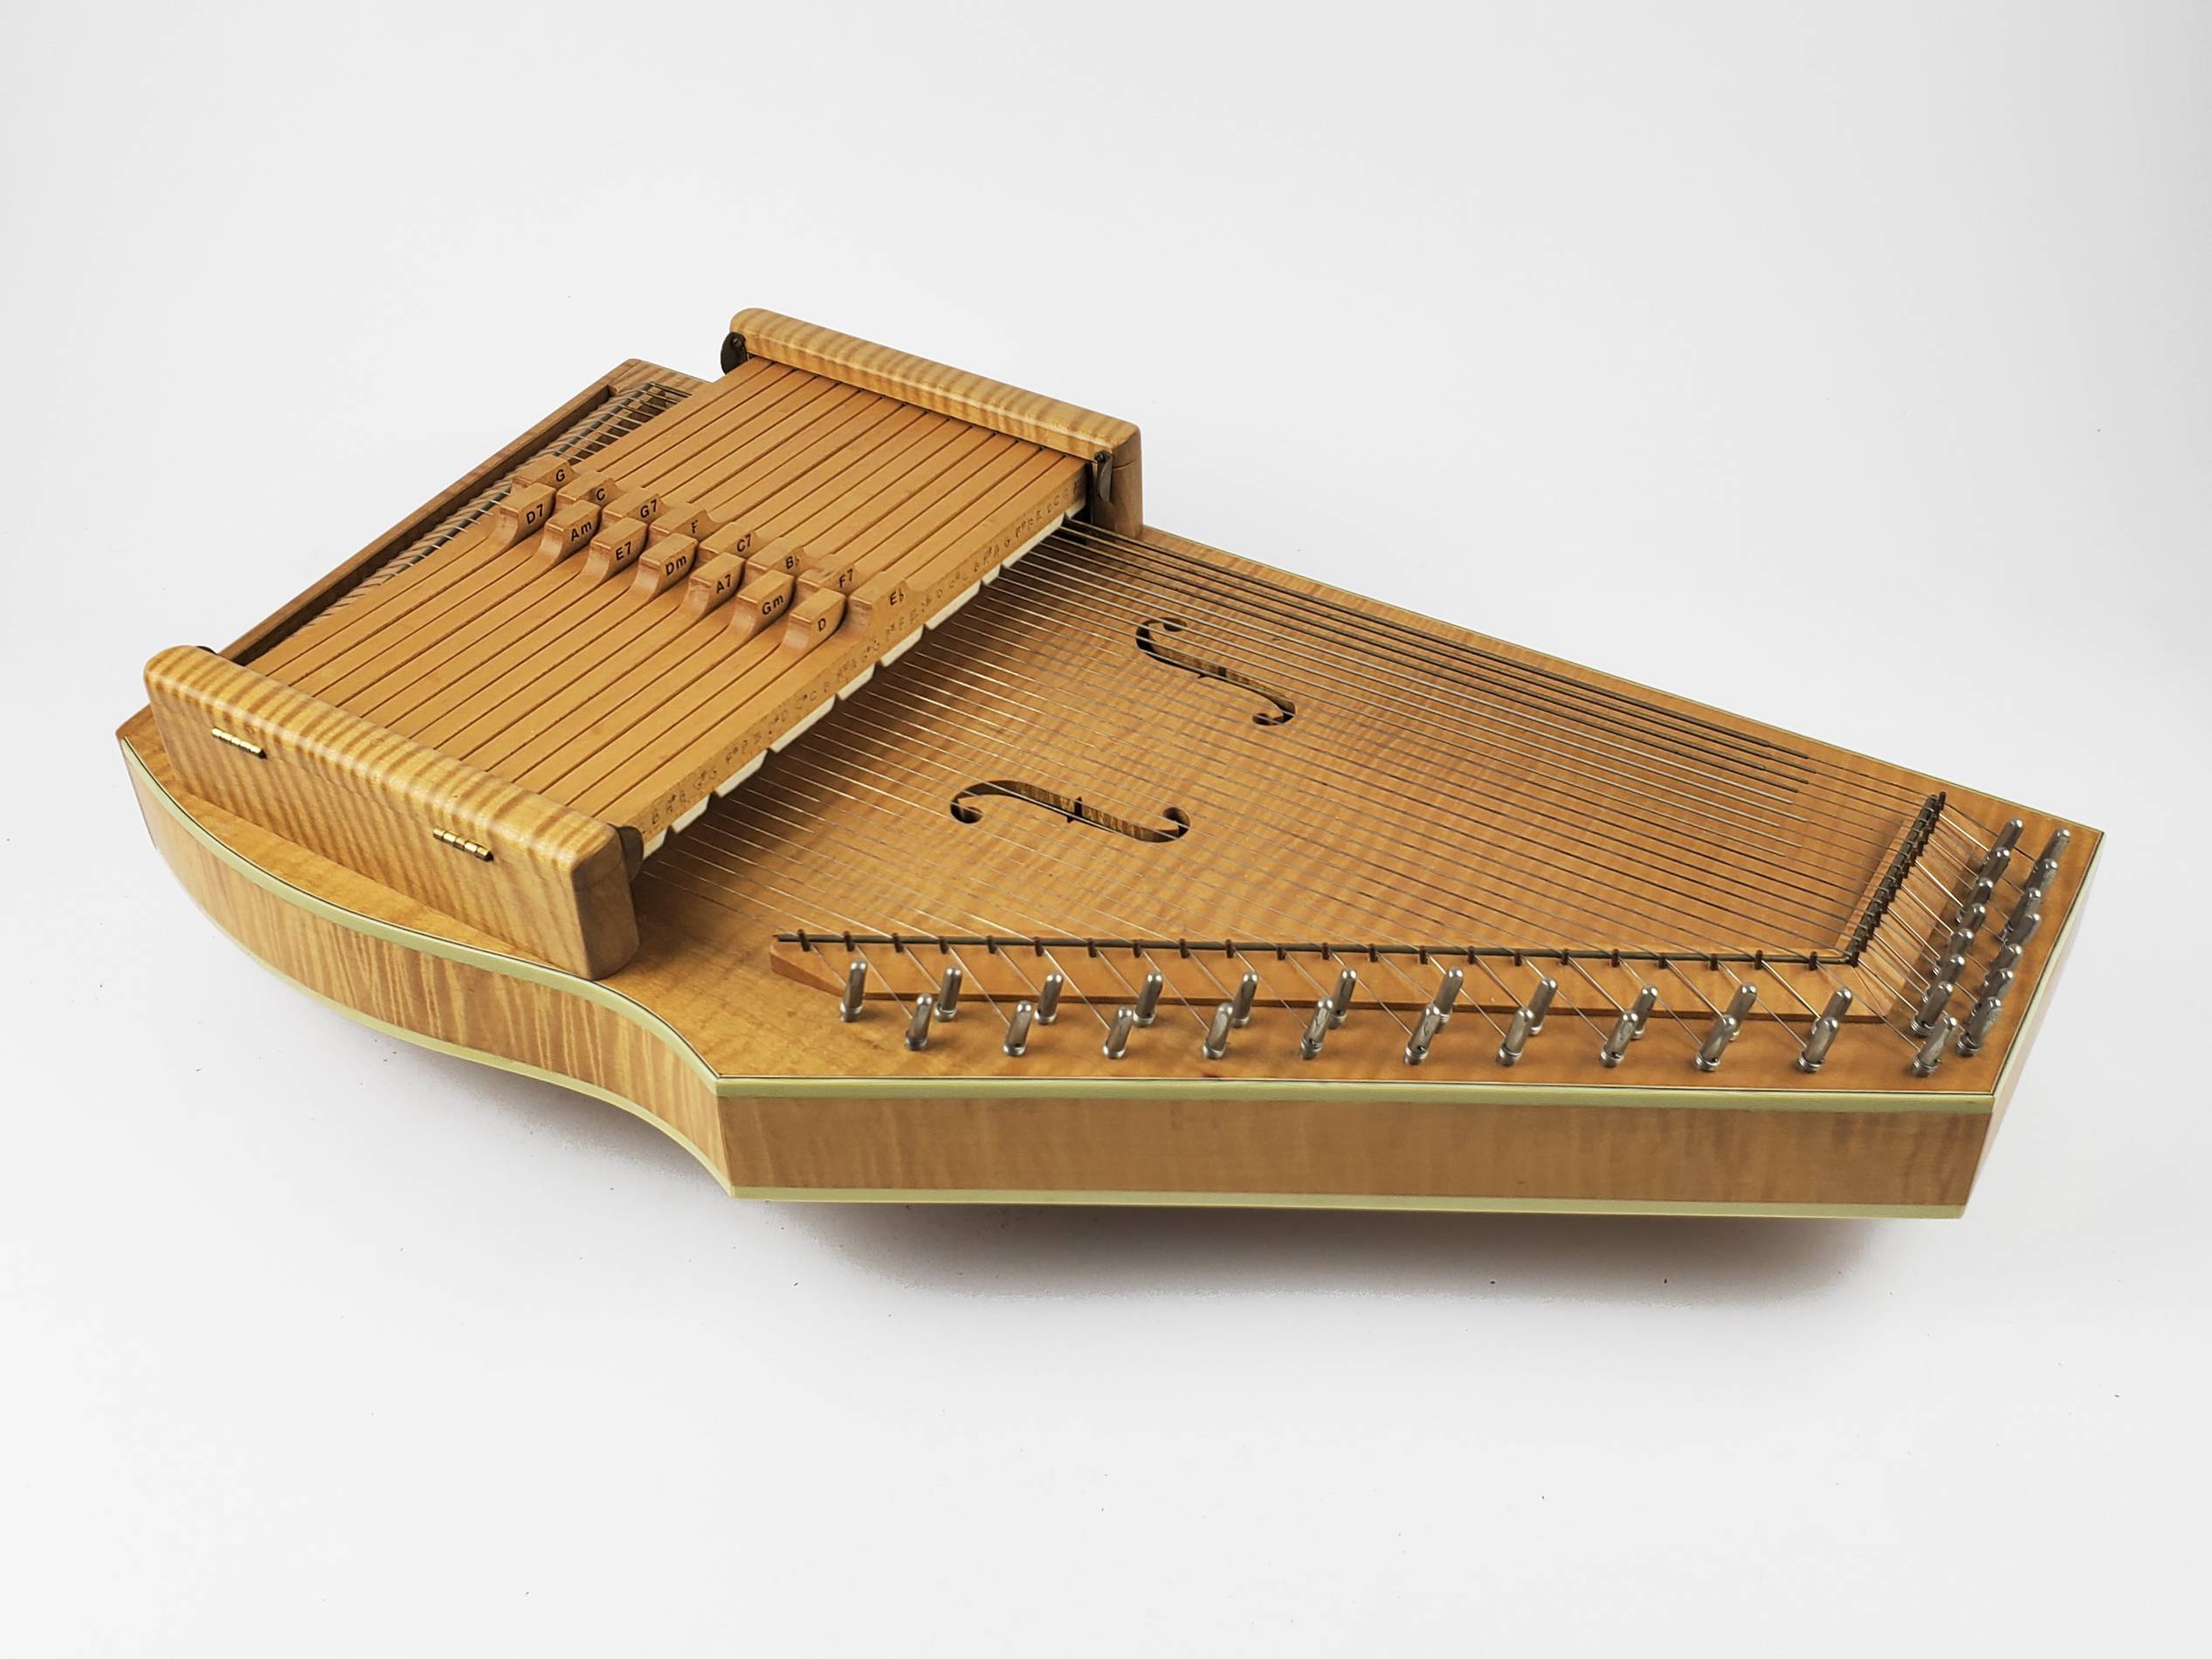 Autoharp from the astounding Meisel Collection